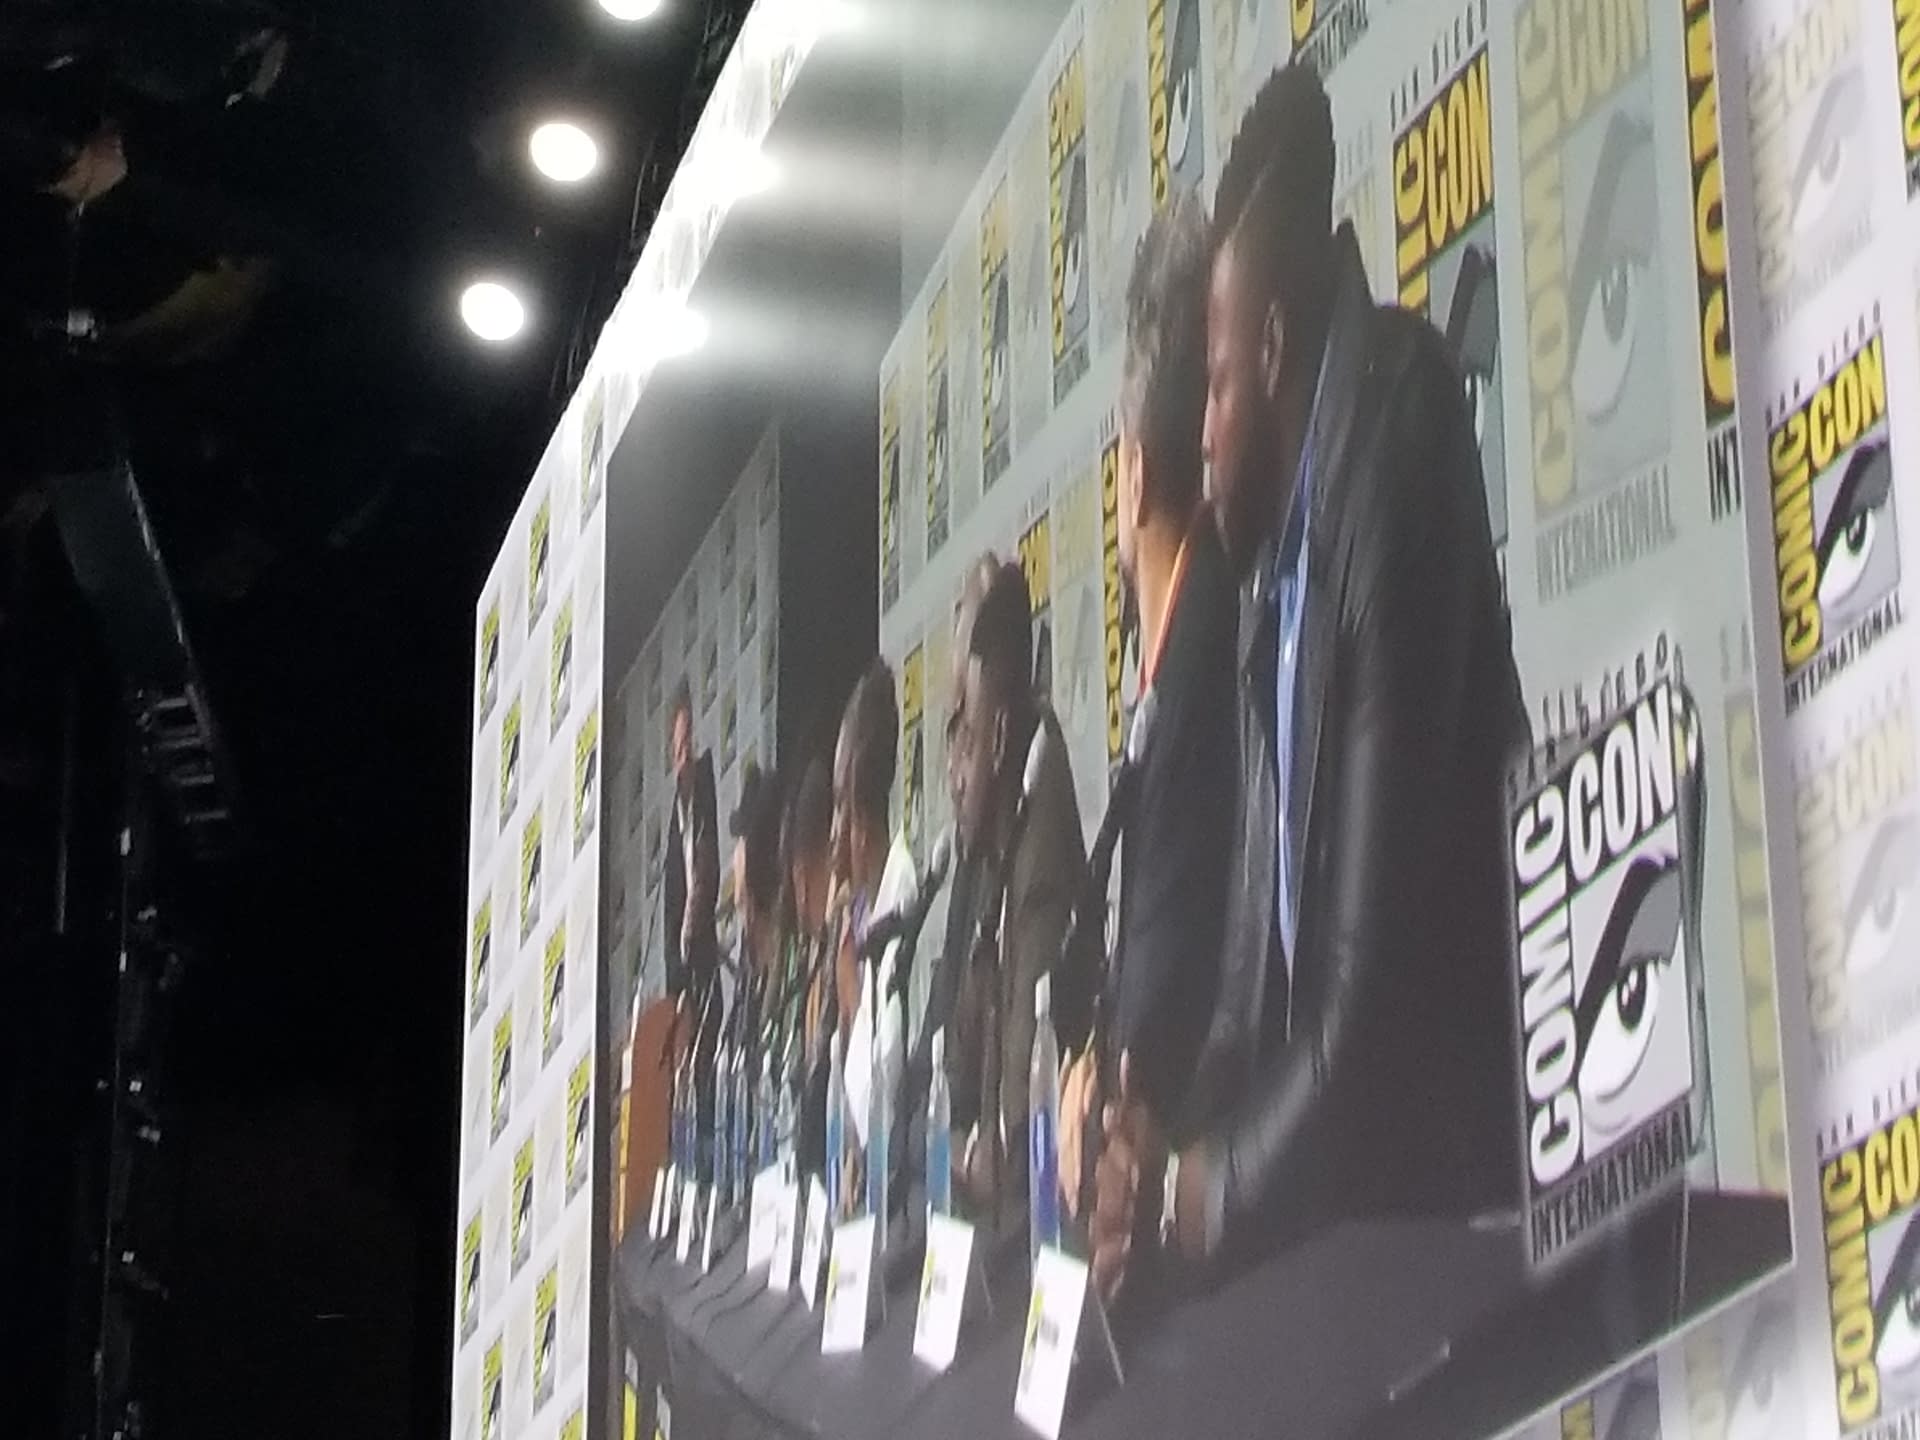 Live From Hall H: Marvel Studios Presentation At San Diego Comic Con